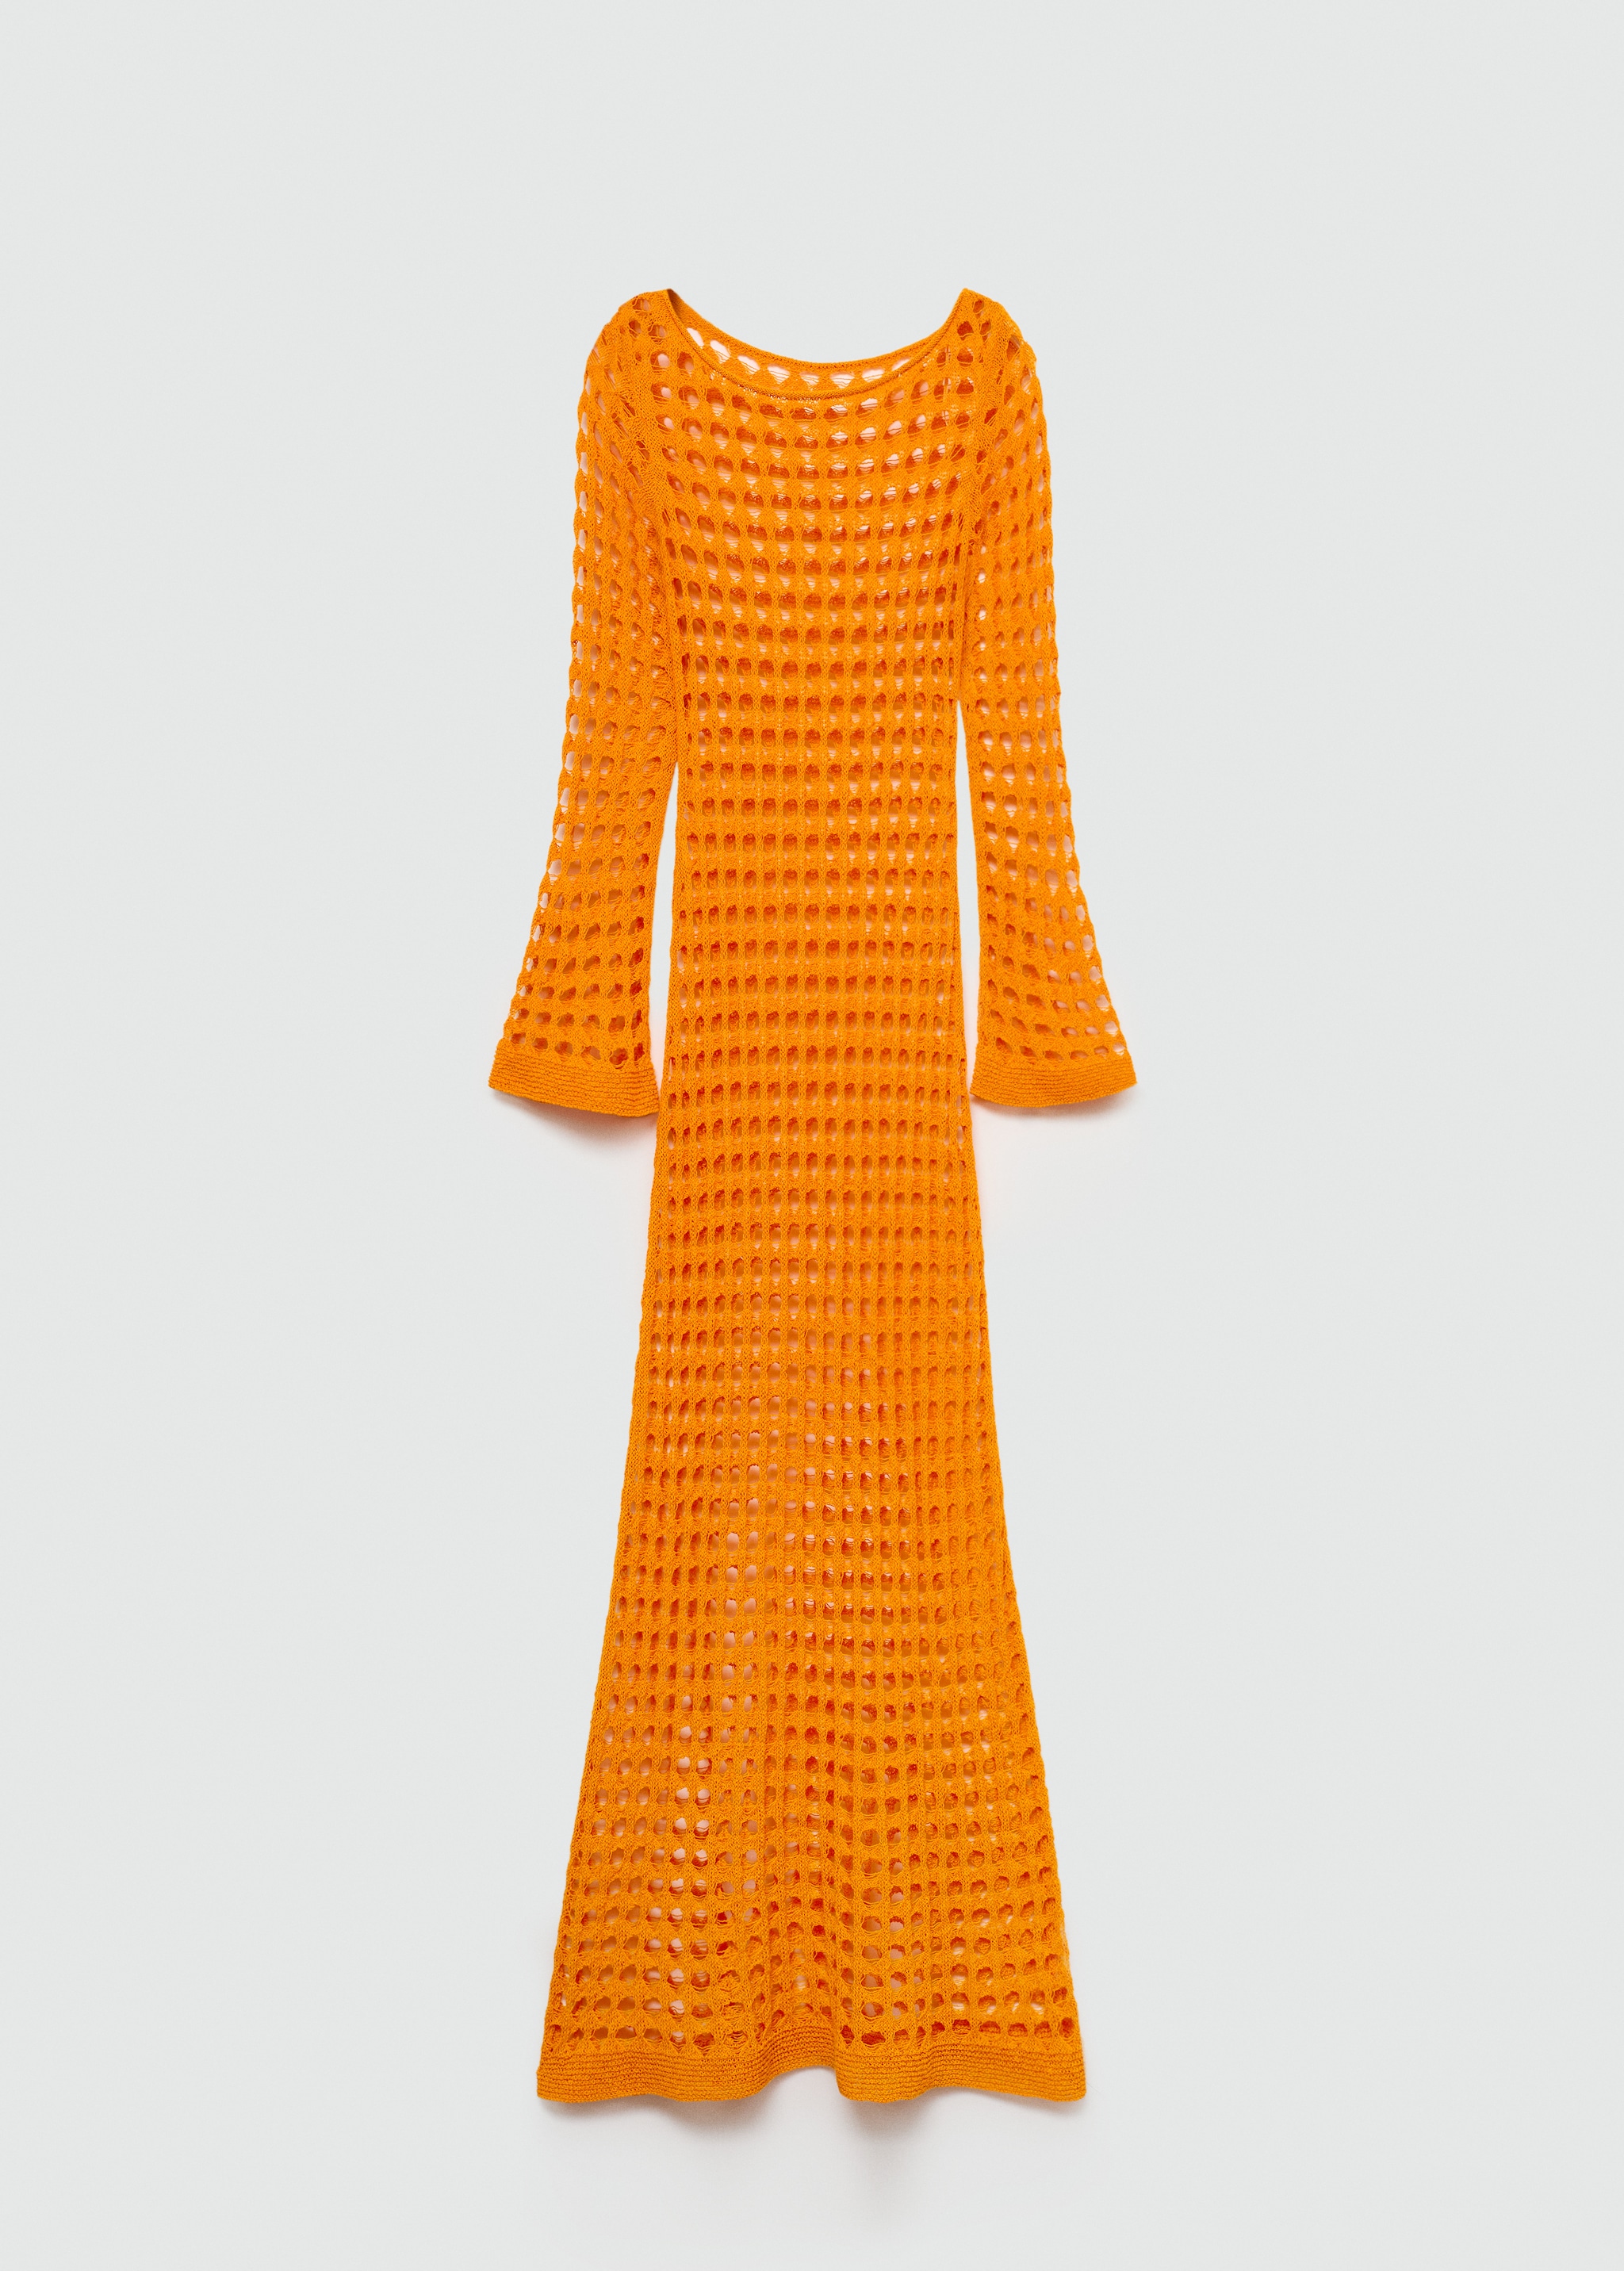 Long openwork knitted dress - Article without model